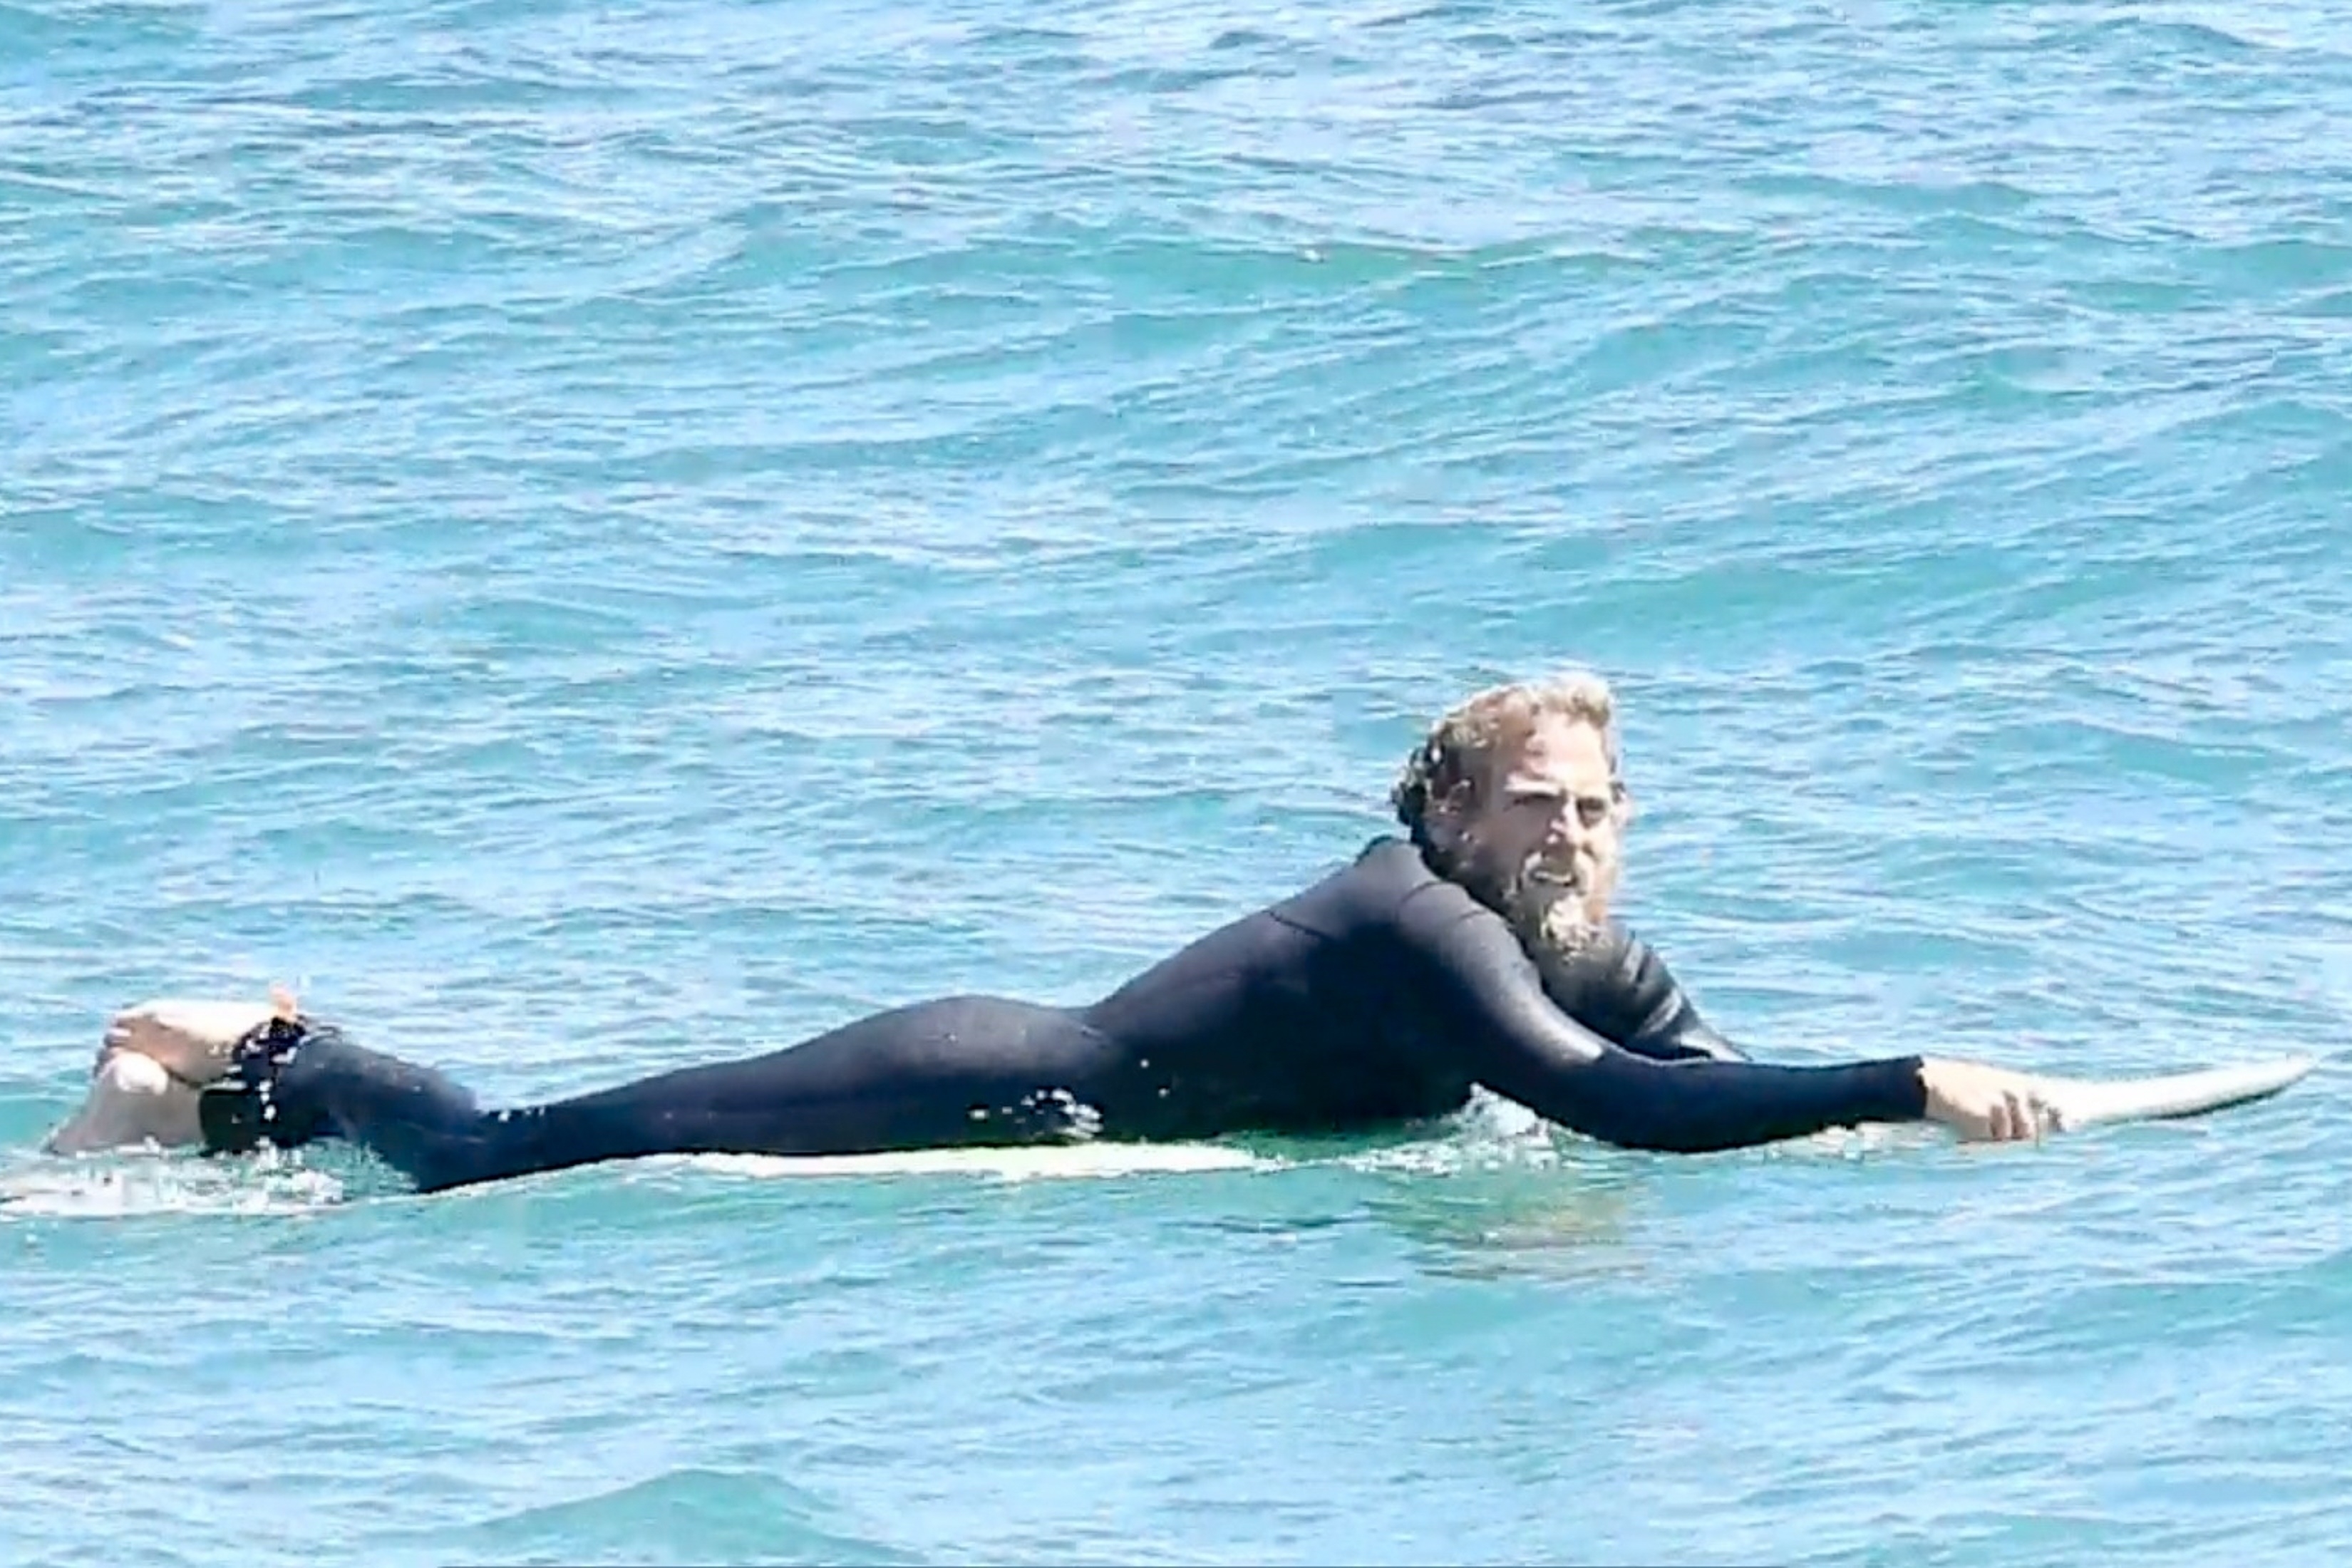 <p><a href="https://www.wonderwall.com/celebrity/profiles/overview/jonah-hill-587.article">Jonah Hill</a> waited to catch a wave while surfing in Malibu on July 21.</p>